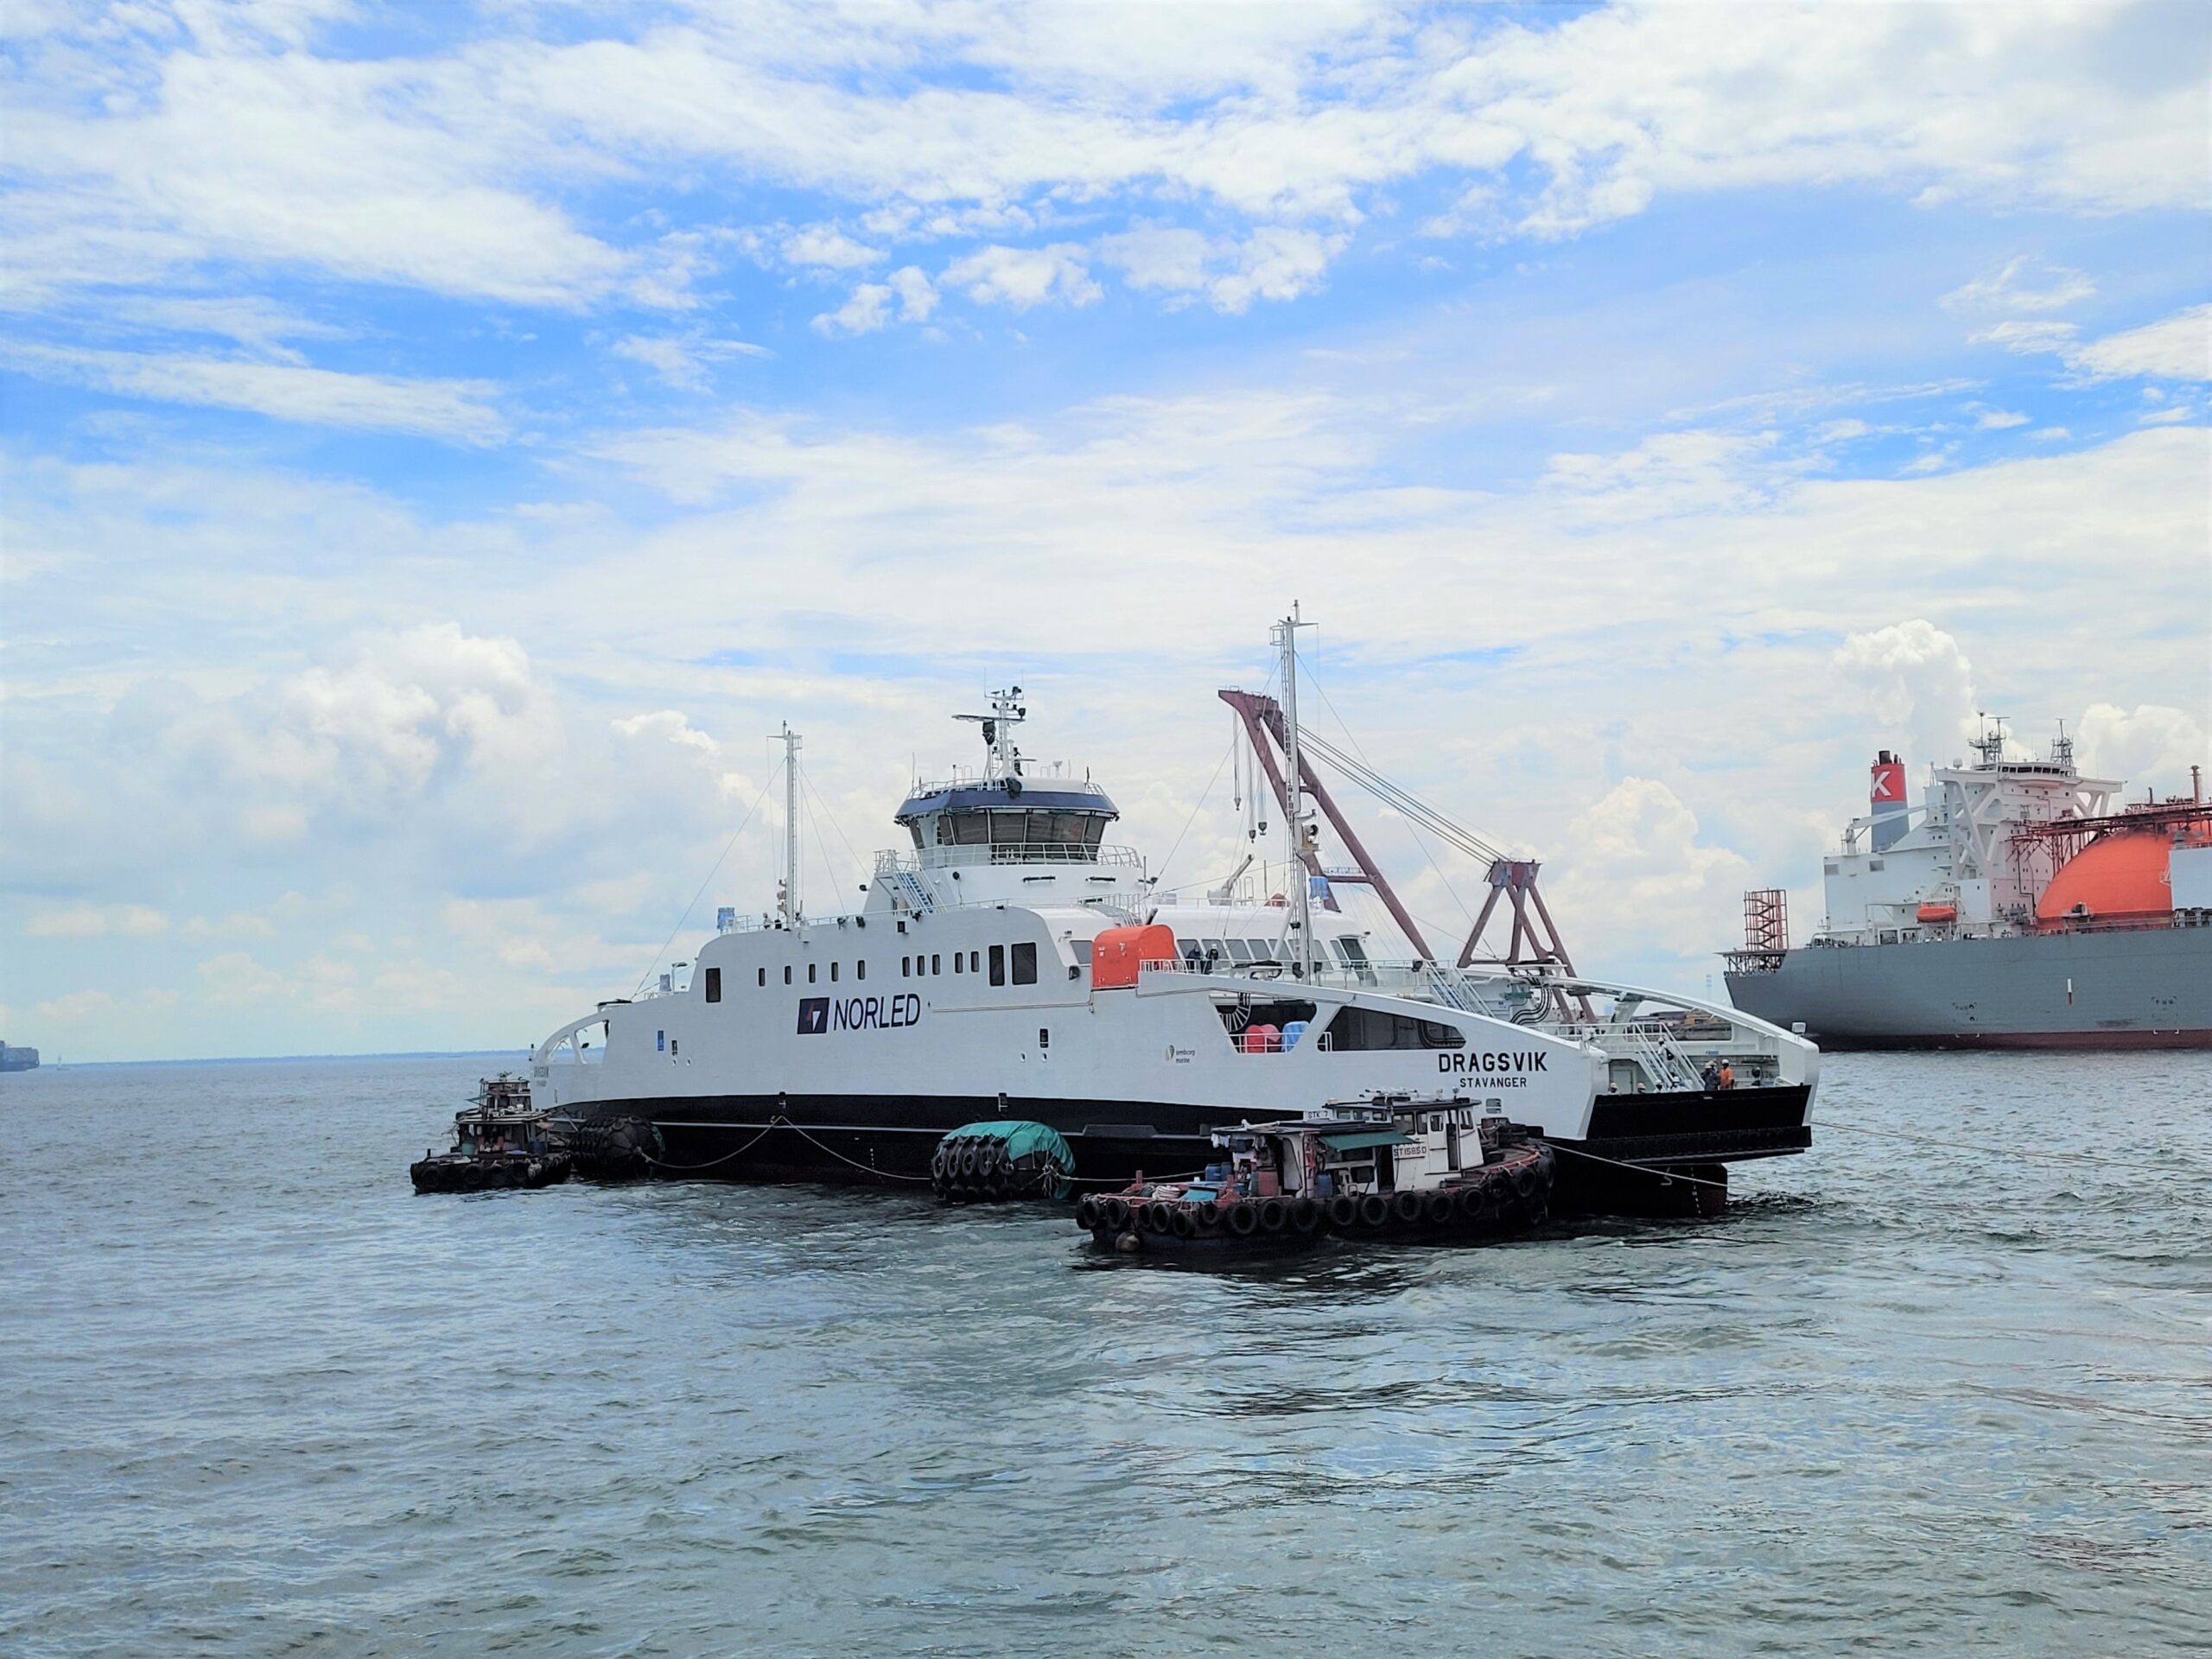 Sembcorp Marine delivers second zero-emission battery-powered Ropax Ferry to Norled